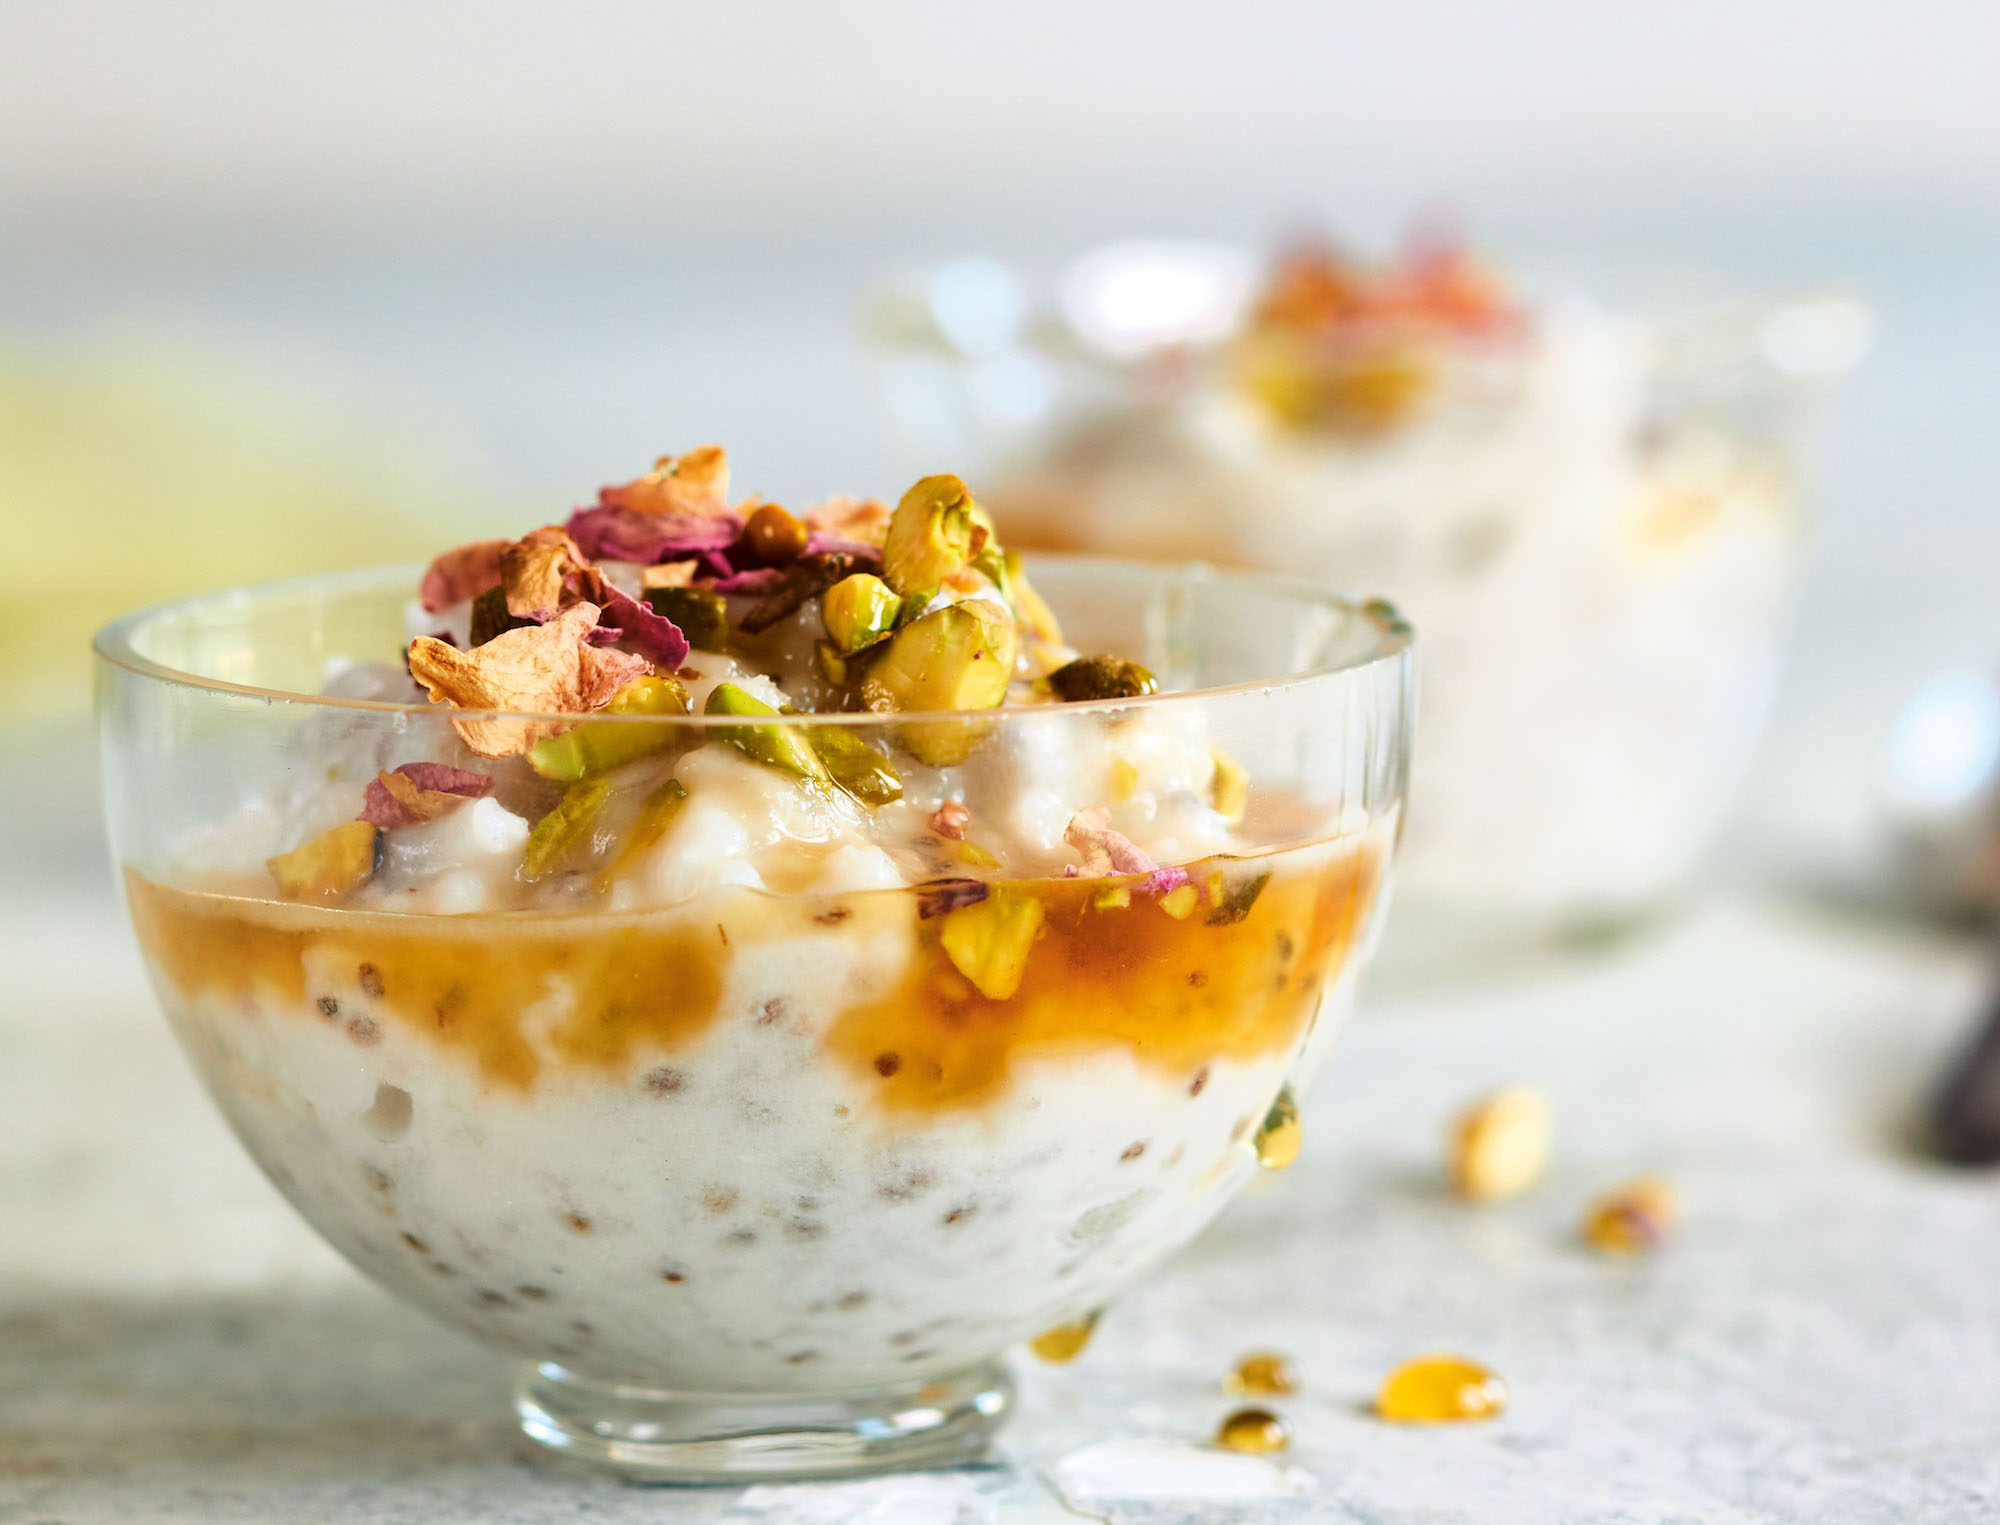 Honey-Rose Rice Pudding with Pistachio-Cardamom Crumble